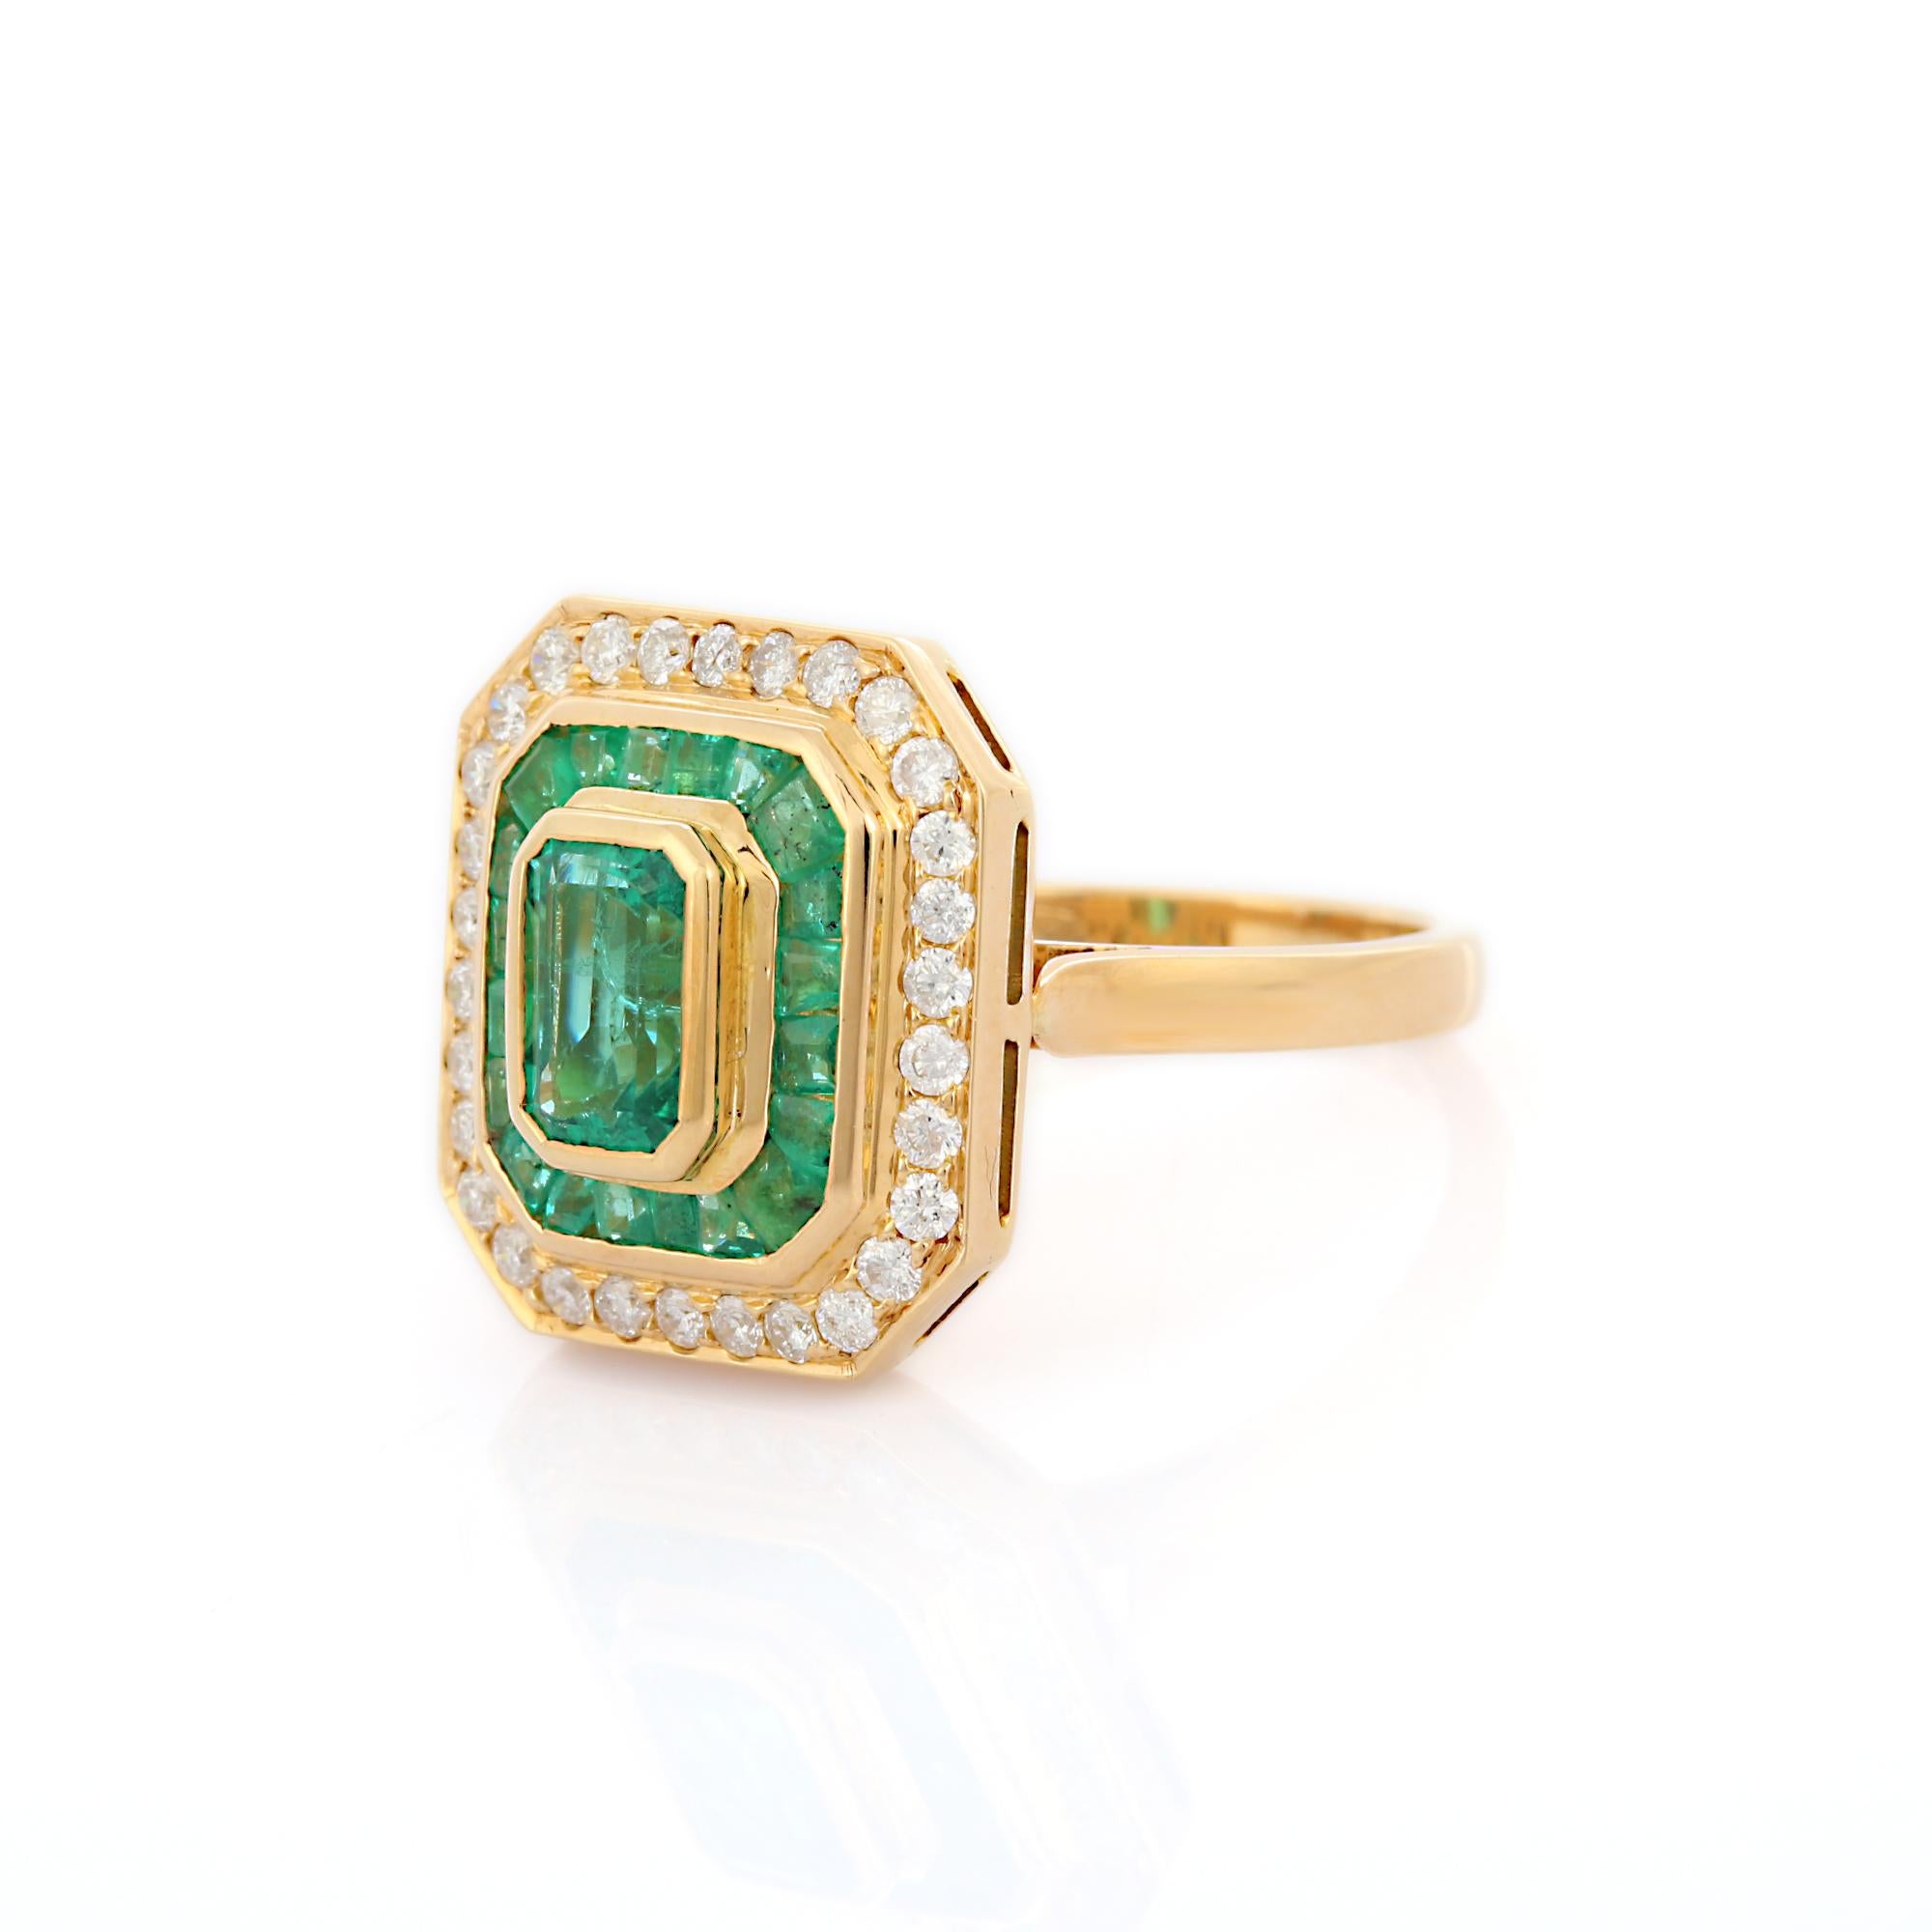 For Sale:  3.03 CTW Diamond and Emerald Cocktail Ring in 18 Karat Solid Yellow Gold 4